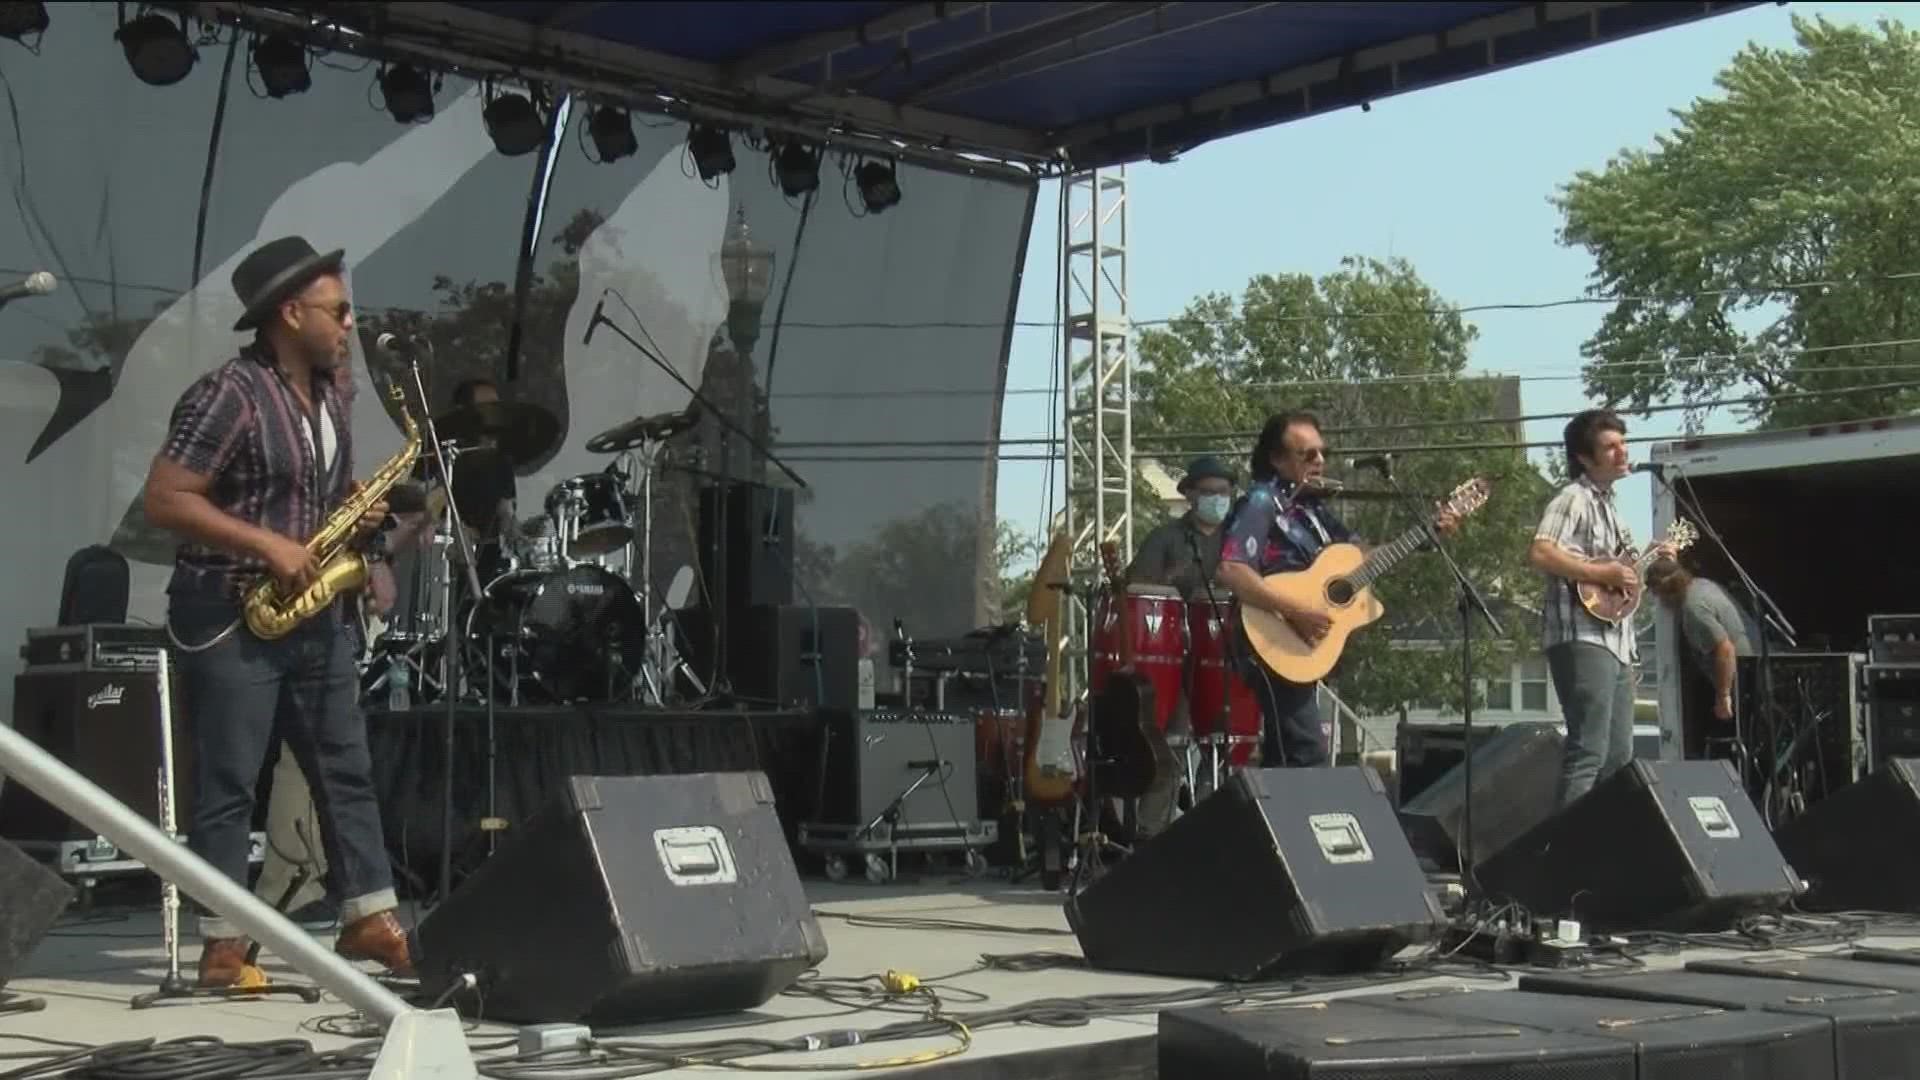 The almost 30-year-old free festival brings artists from all around the world to downtown BG.